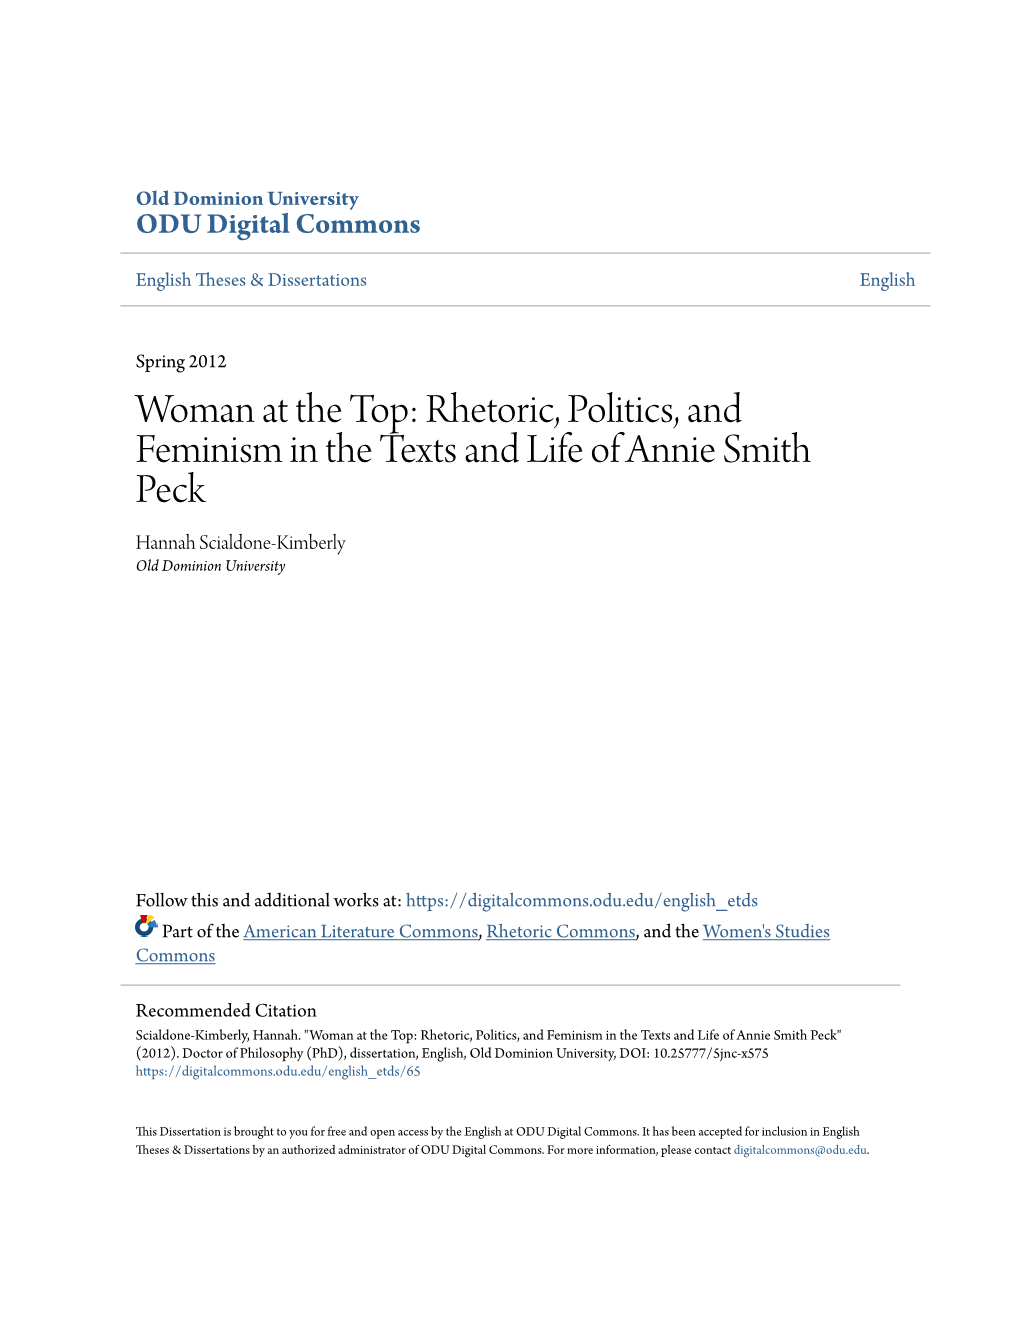 Rhetoric, Politics, and Feminism in the Texts and Life of Annie Smith Peck Hannah Scialdone-Kimberly Old Dominion University